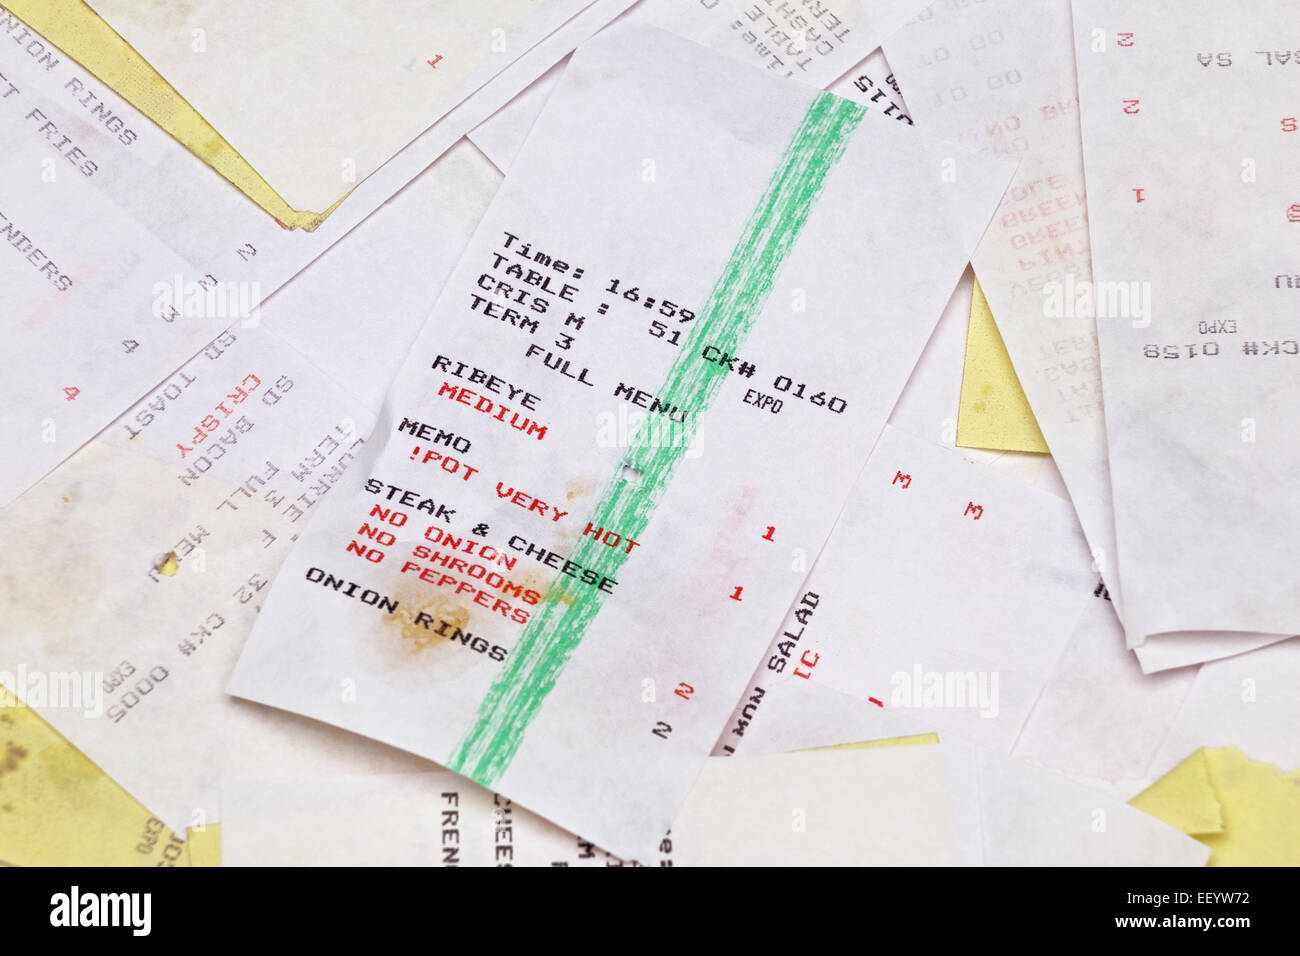 Yellow and white grease stained restaurant food order tickets in a pile. Stock Photo